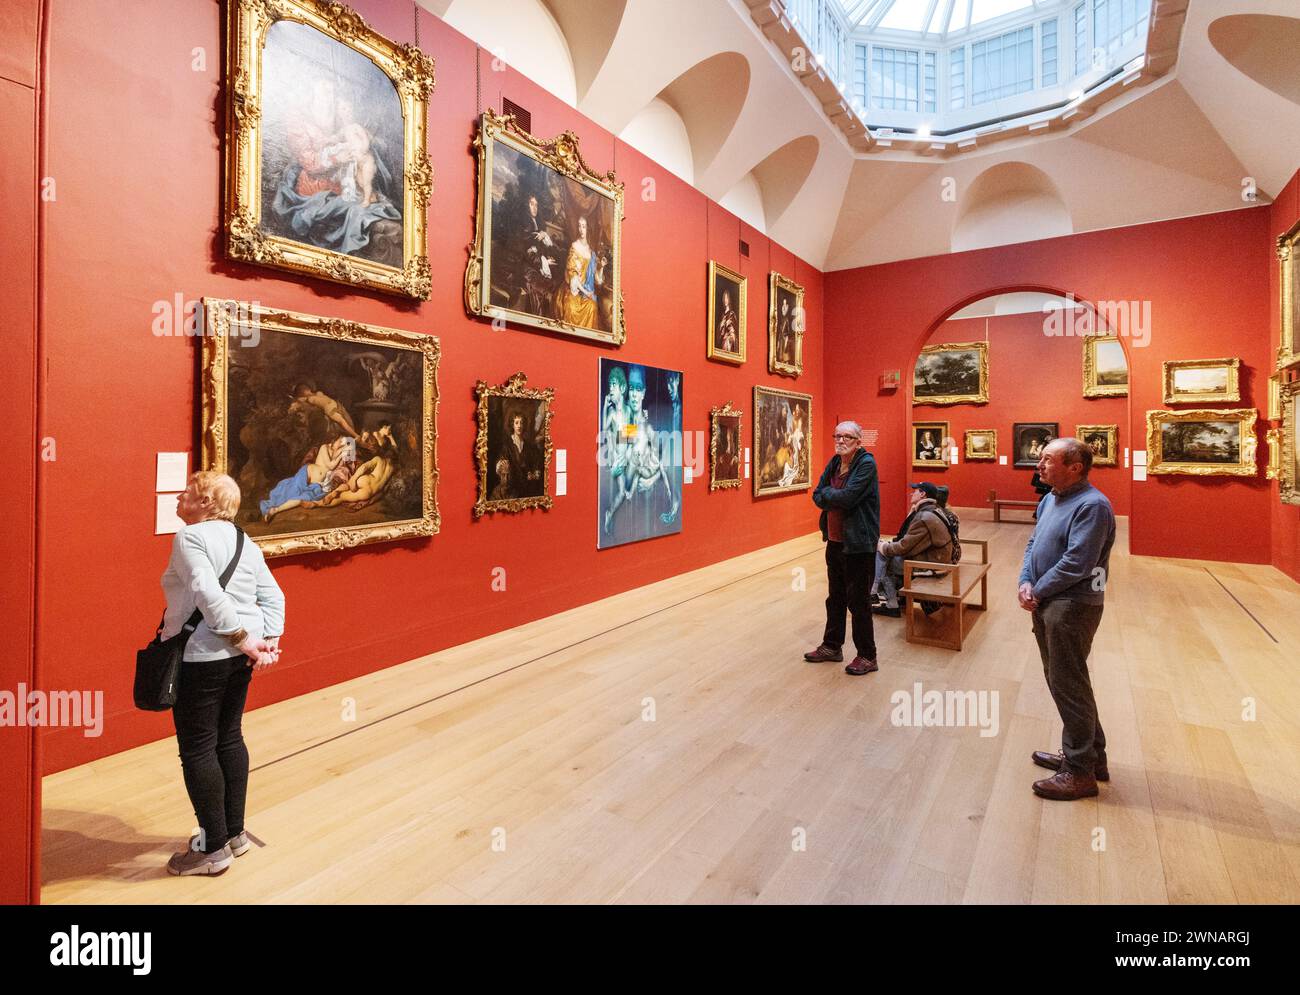 Dulwich Picture Gallery; Dulwich London. An art Gallery housing 600 paintings, mainly european masterpieces. Interior, people looking at paintings. Stock Photo